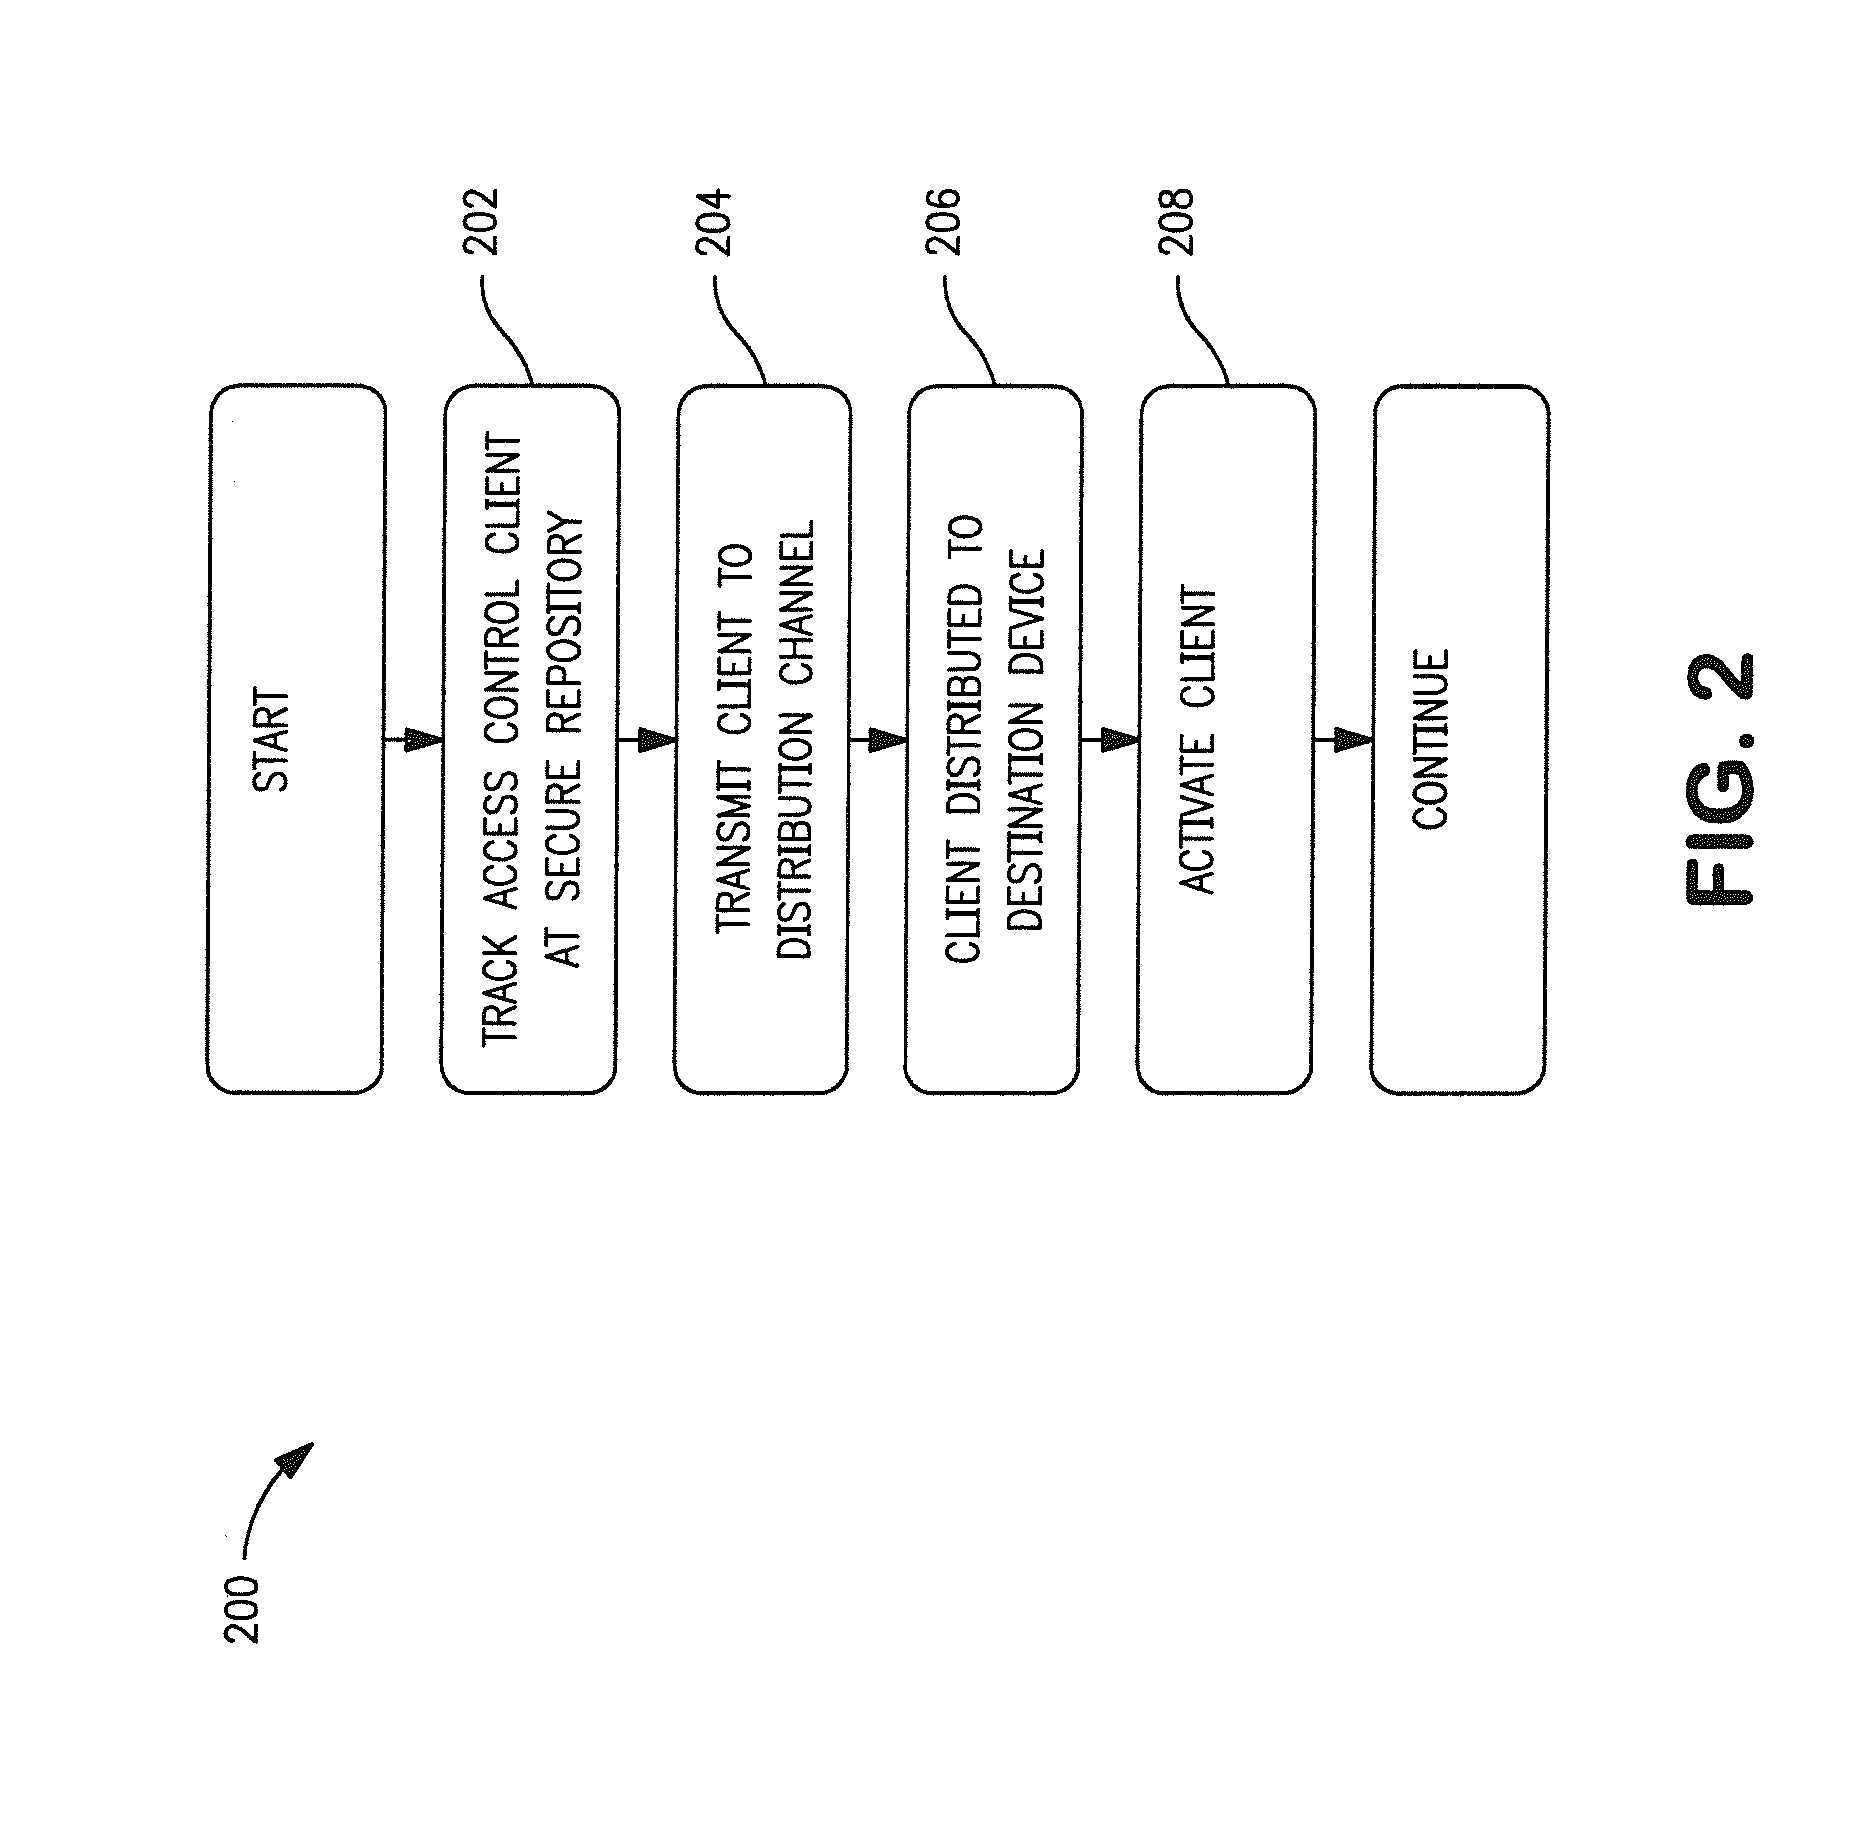 Apparatus and methods for distributing and storing electronic access clients